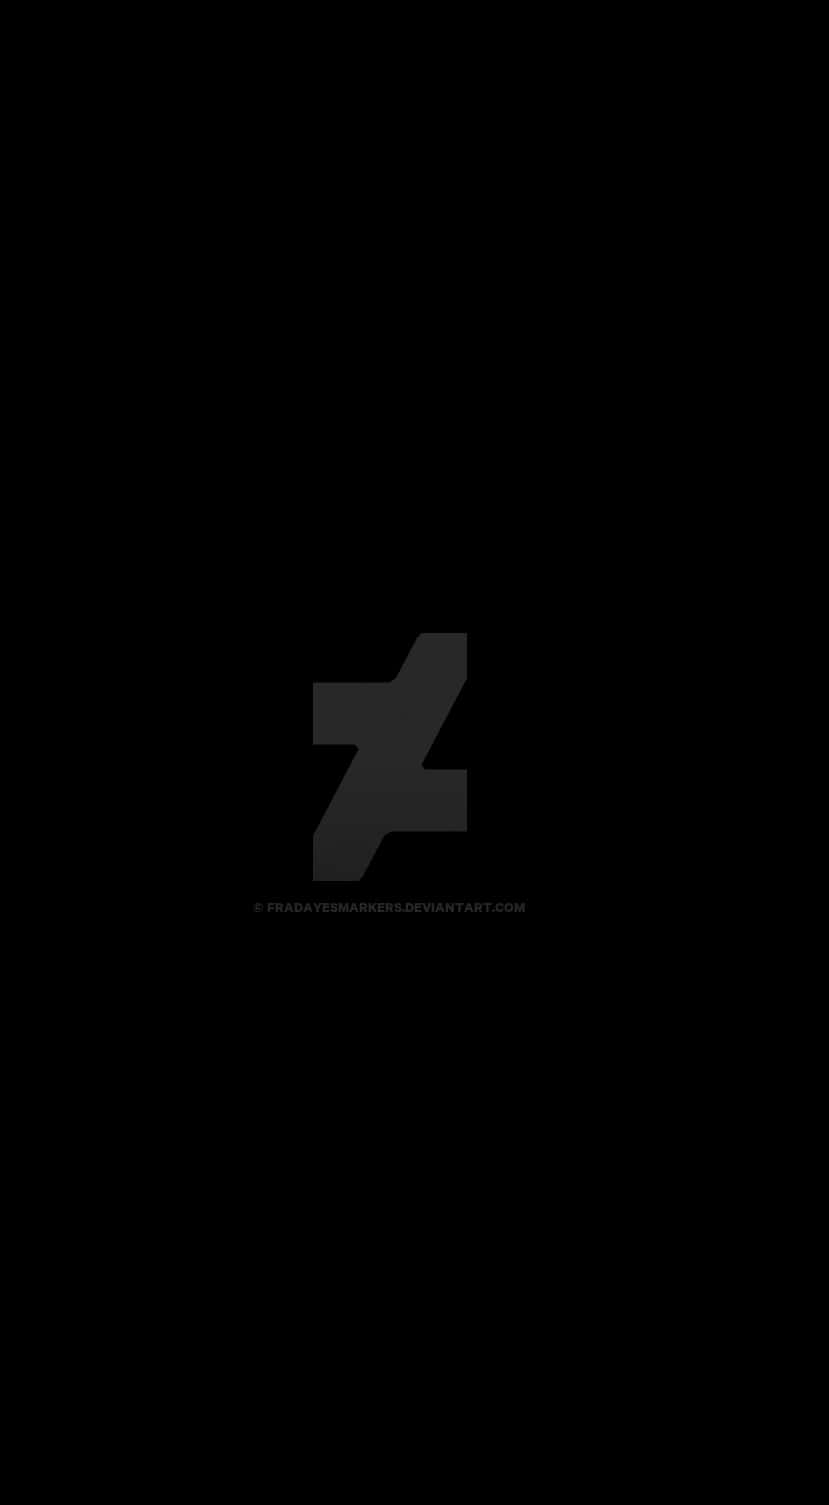 A Black Background With A Letter Z